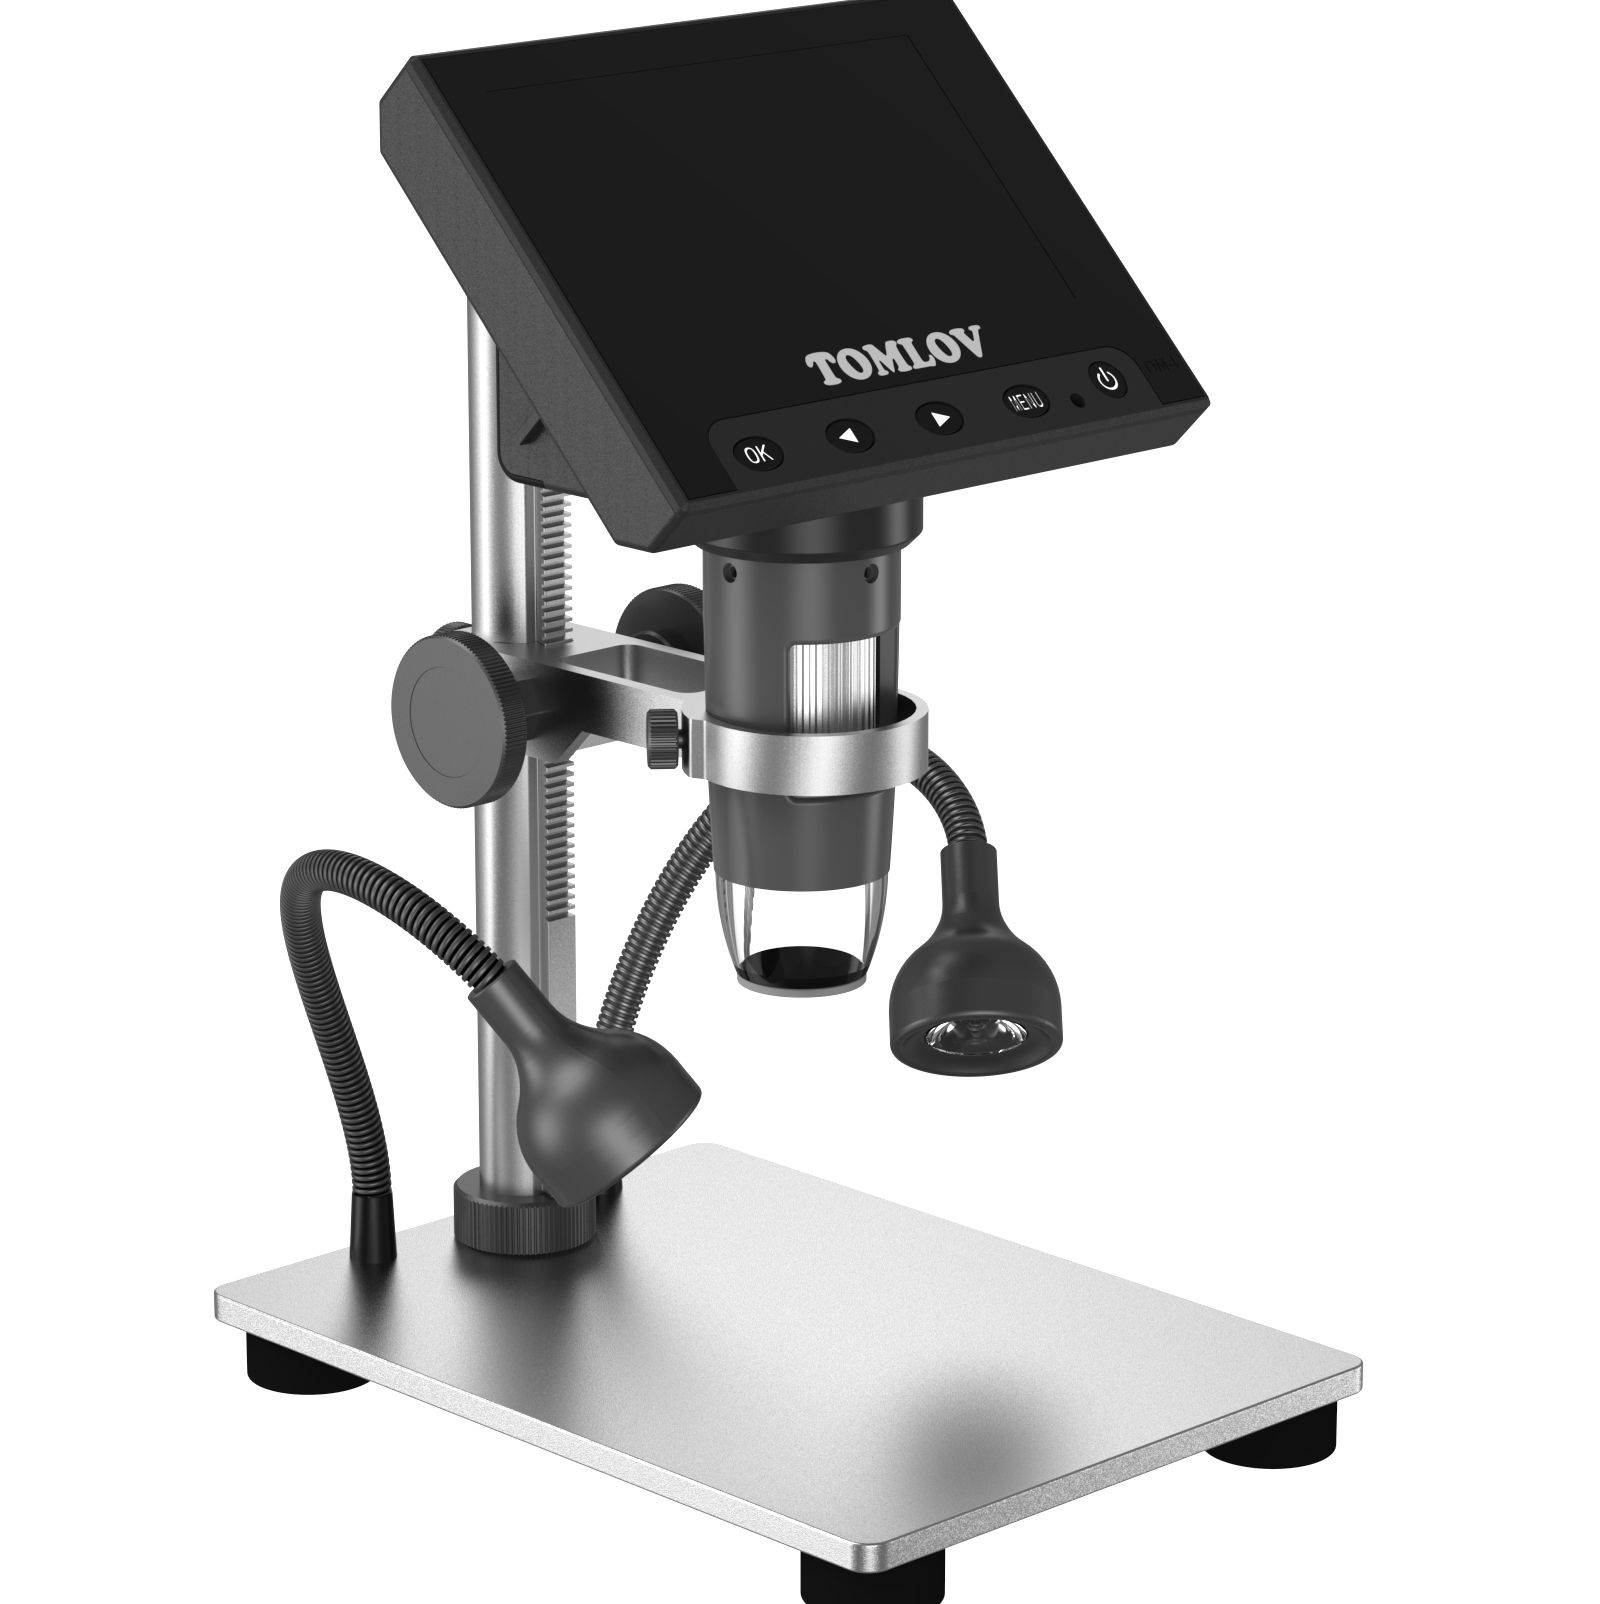 TOMLOV 1000X Error Coin Microscope DM4S +6 inch Extension Tube ET02,LCD  Digital Microscope with 4.3 Screen, Metal Stand, PC View, Photo/Video for  Adults Kids, 32 GB SD Card Included